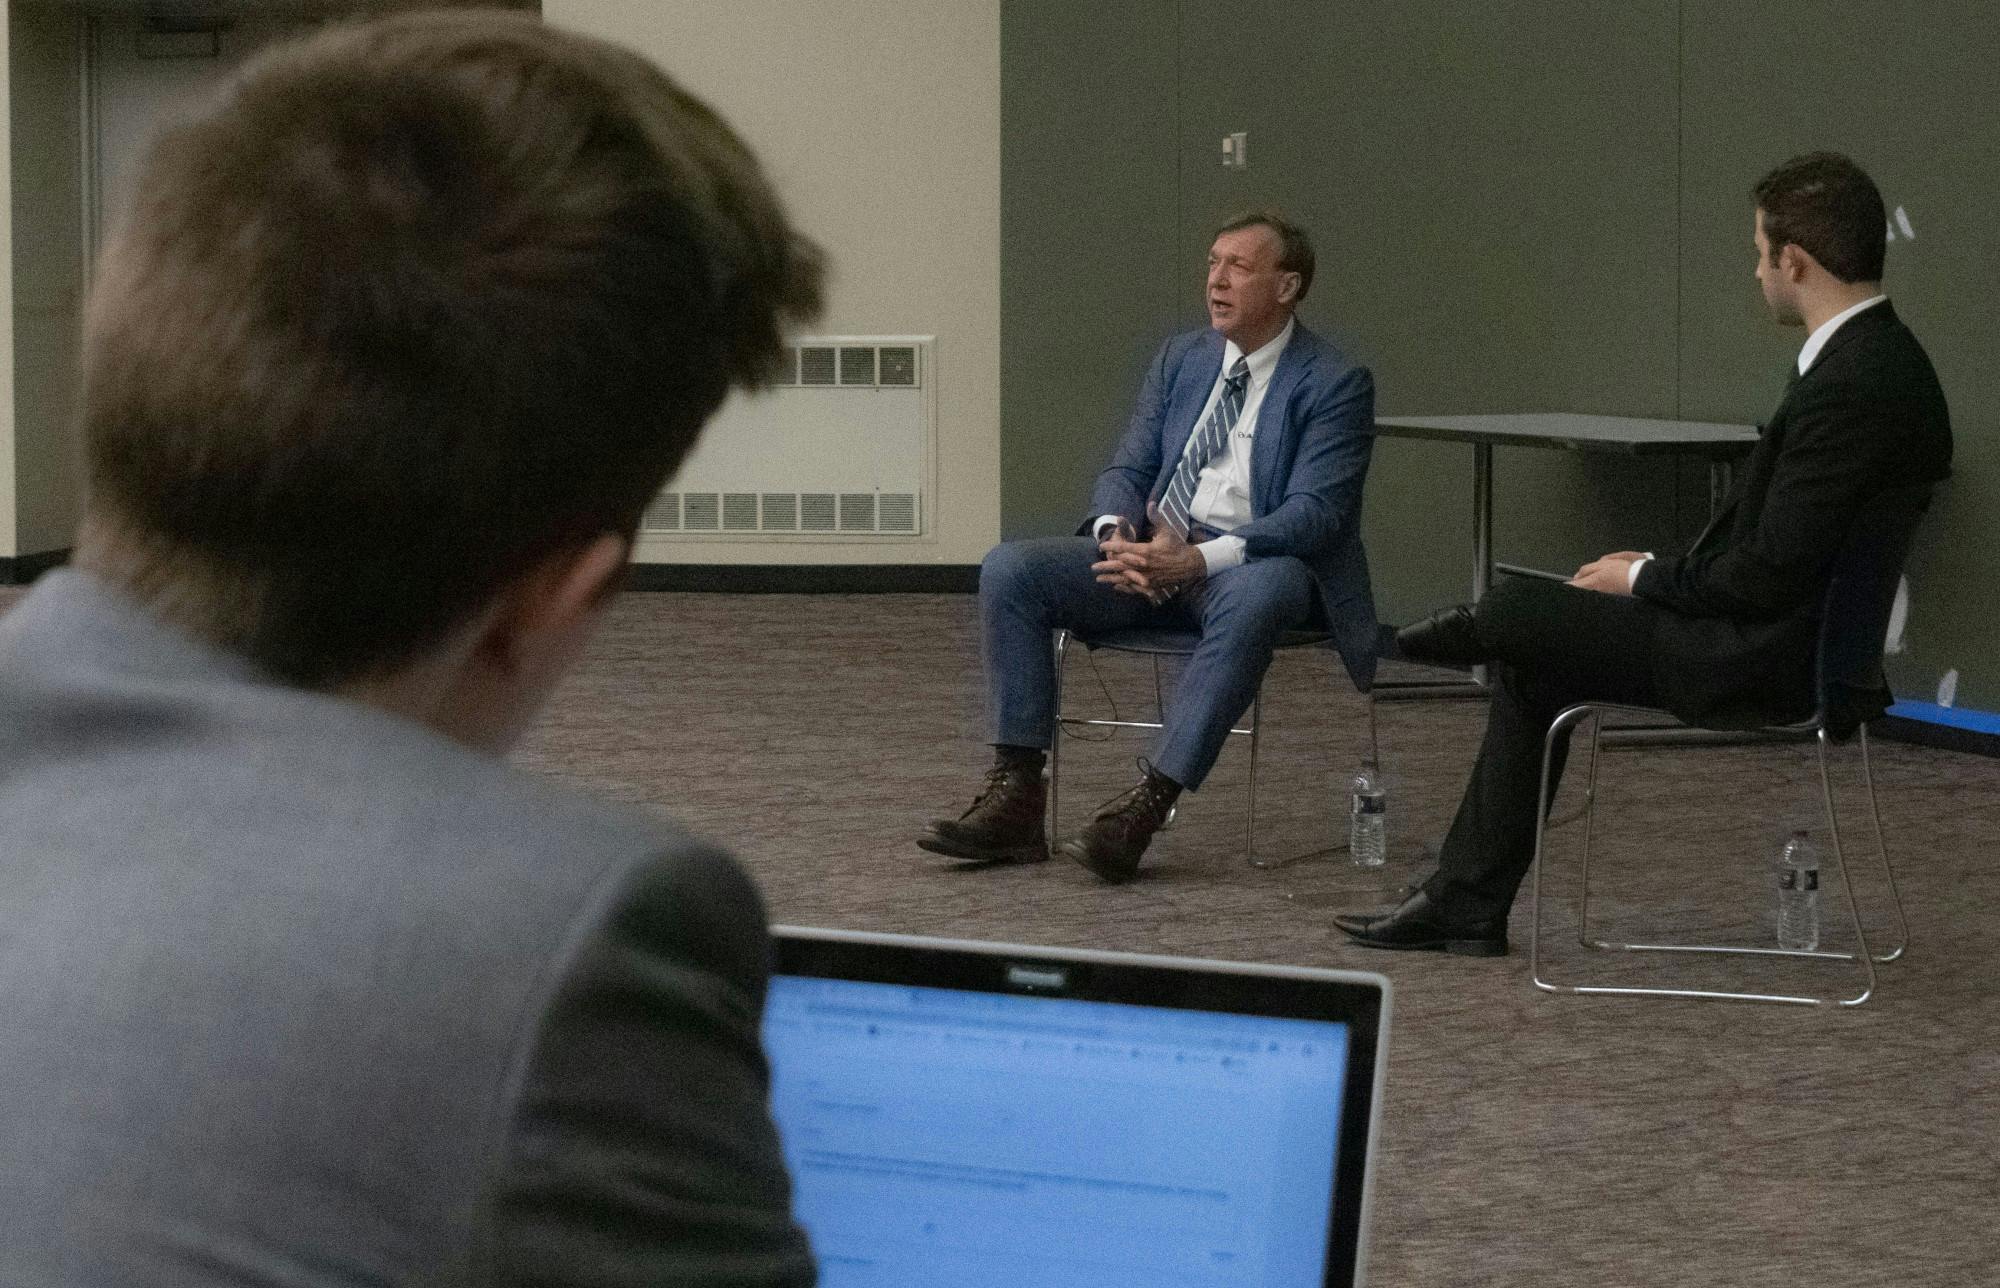 <p>A student watches President Stanley intently as he answers his question about new intramural facilities in the future. Students gathered to ask President Stanley questions about university related topics during the Ask Stanley Q&amp;A hosted in the Business College Complex on Feb. 18, 2020.</p>